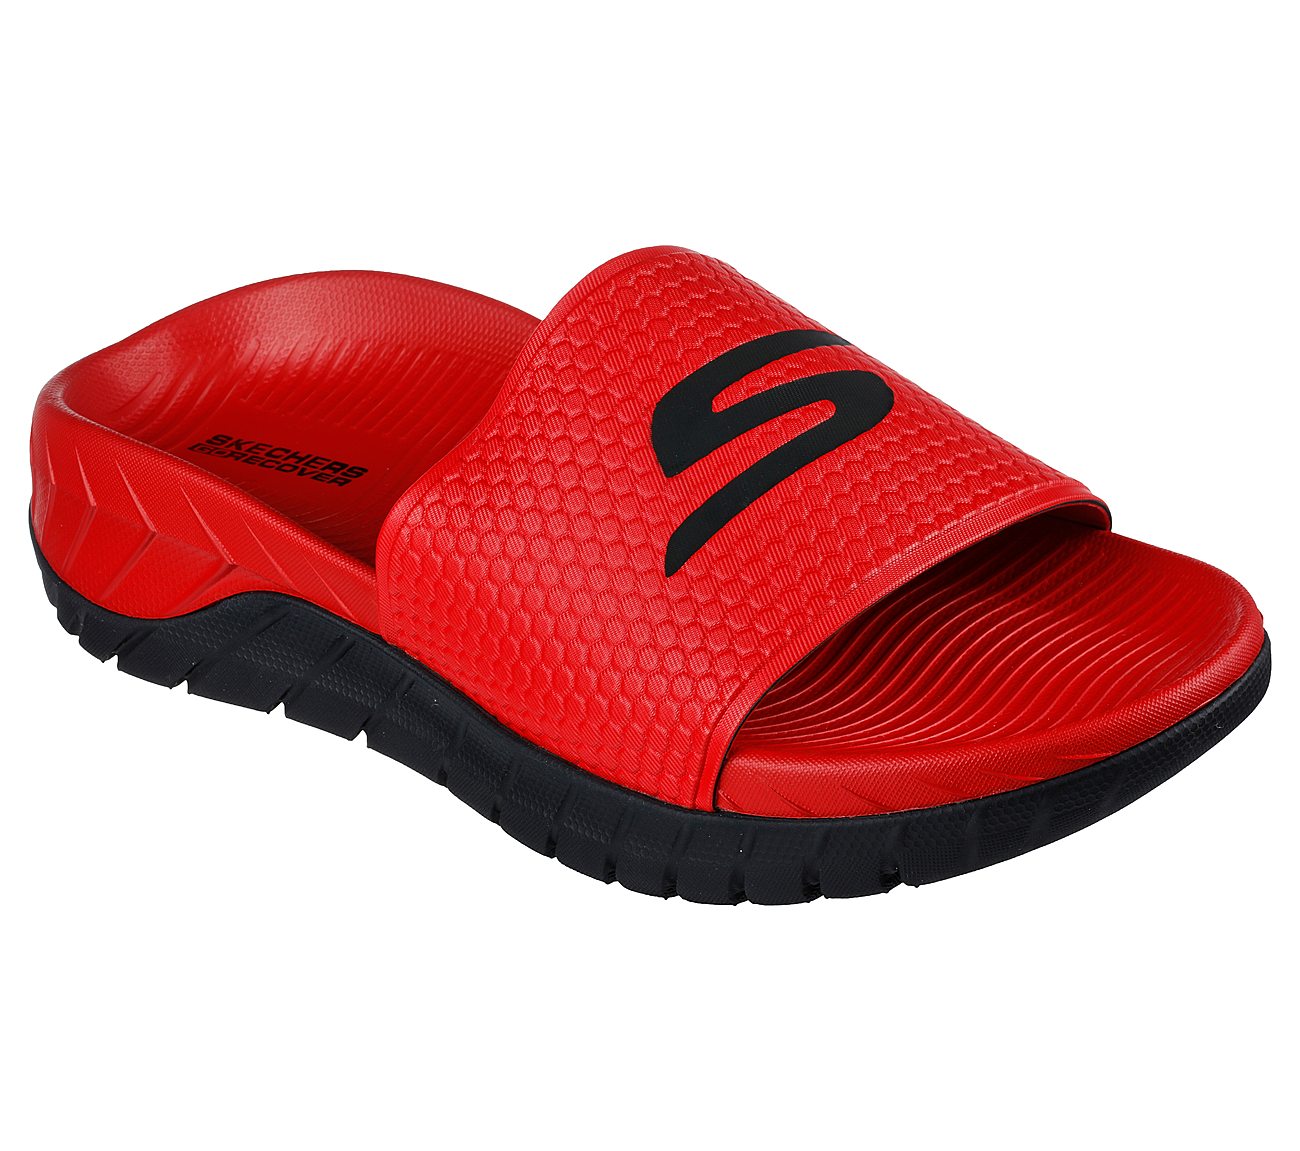 GO RECOVER SANDAL, RED/BLACK Footwear Right View